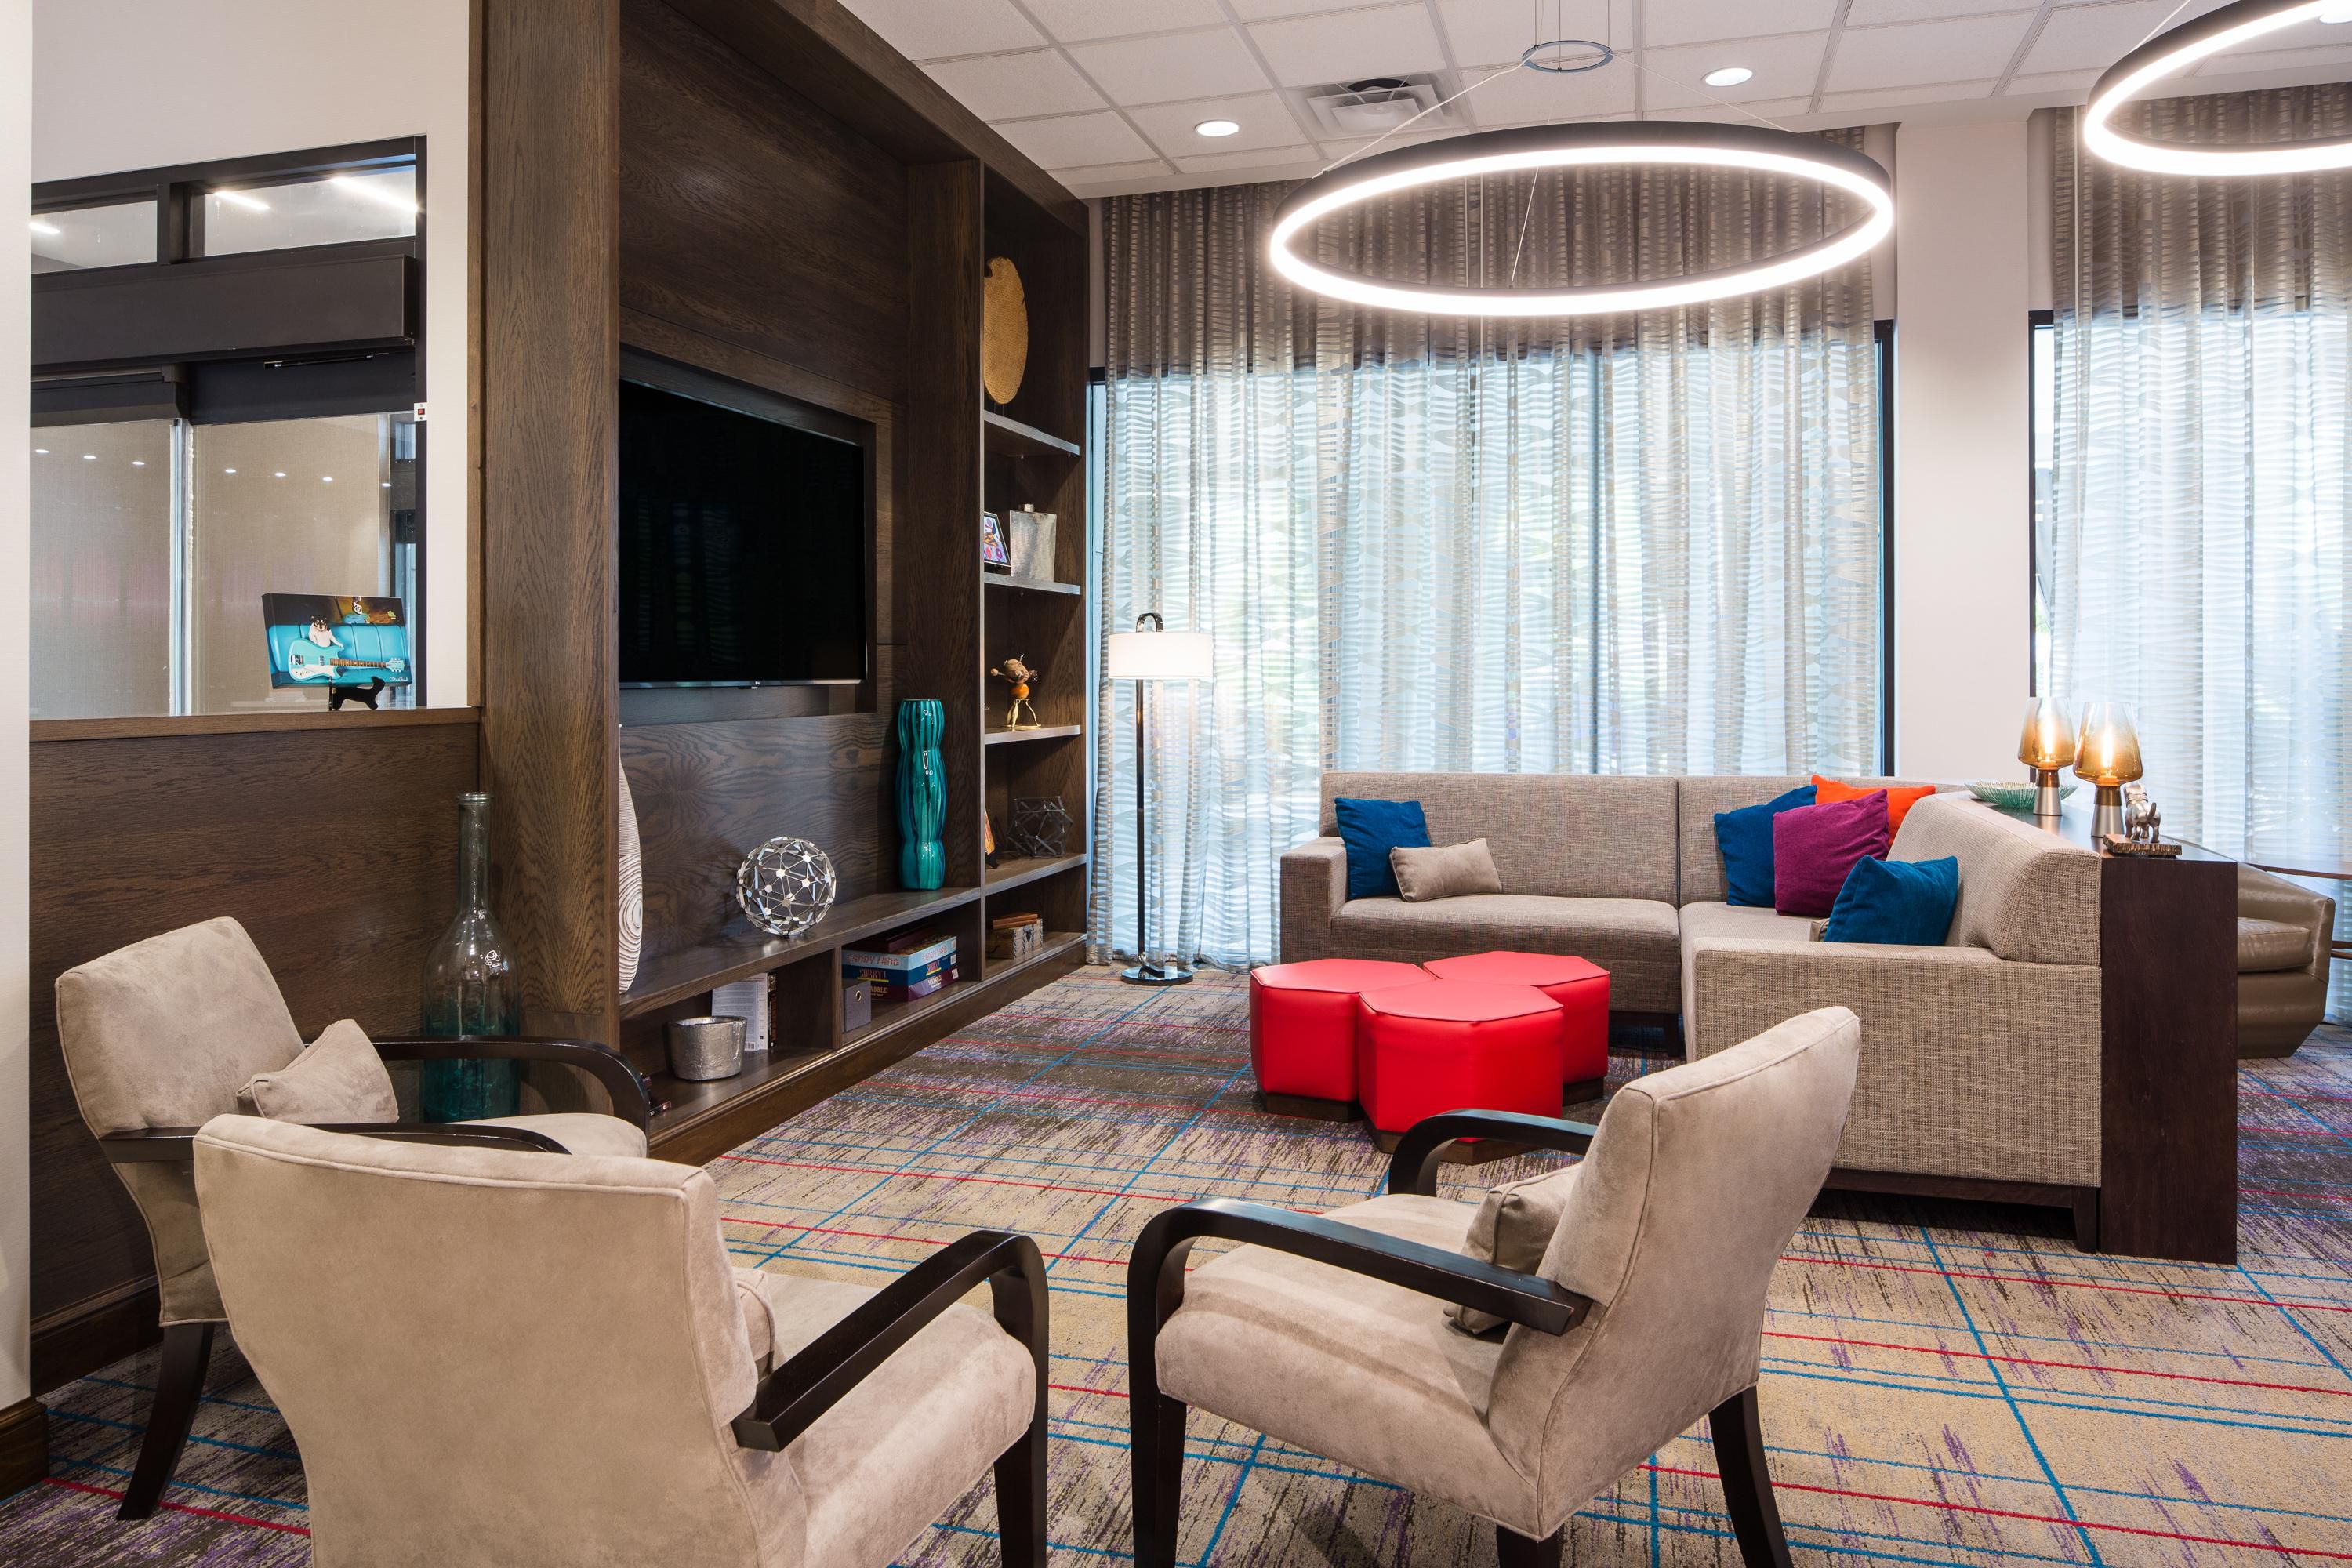 Sit back and relax in our newly renovated downtown Memphis hotel.